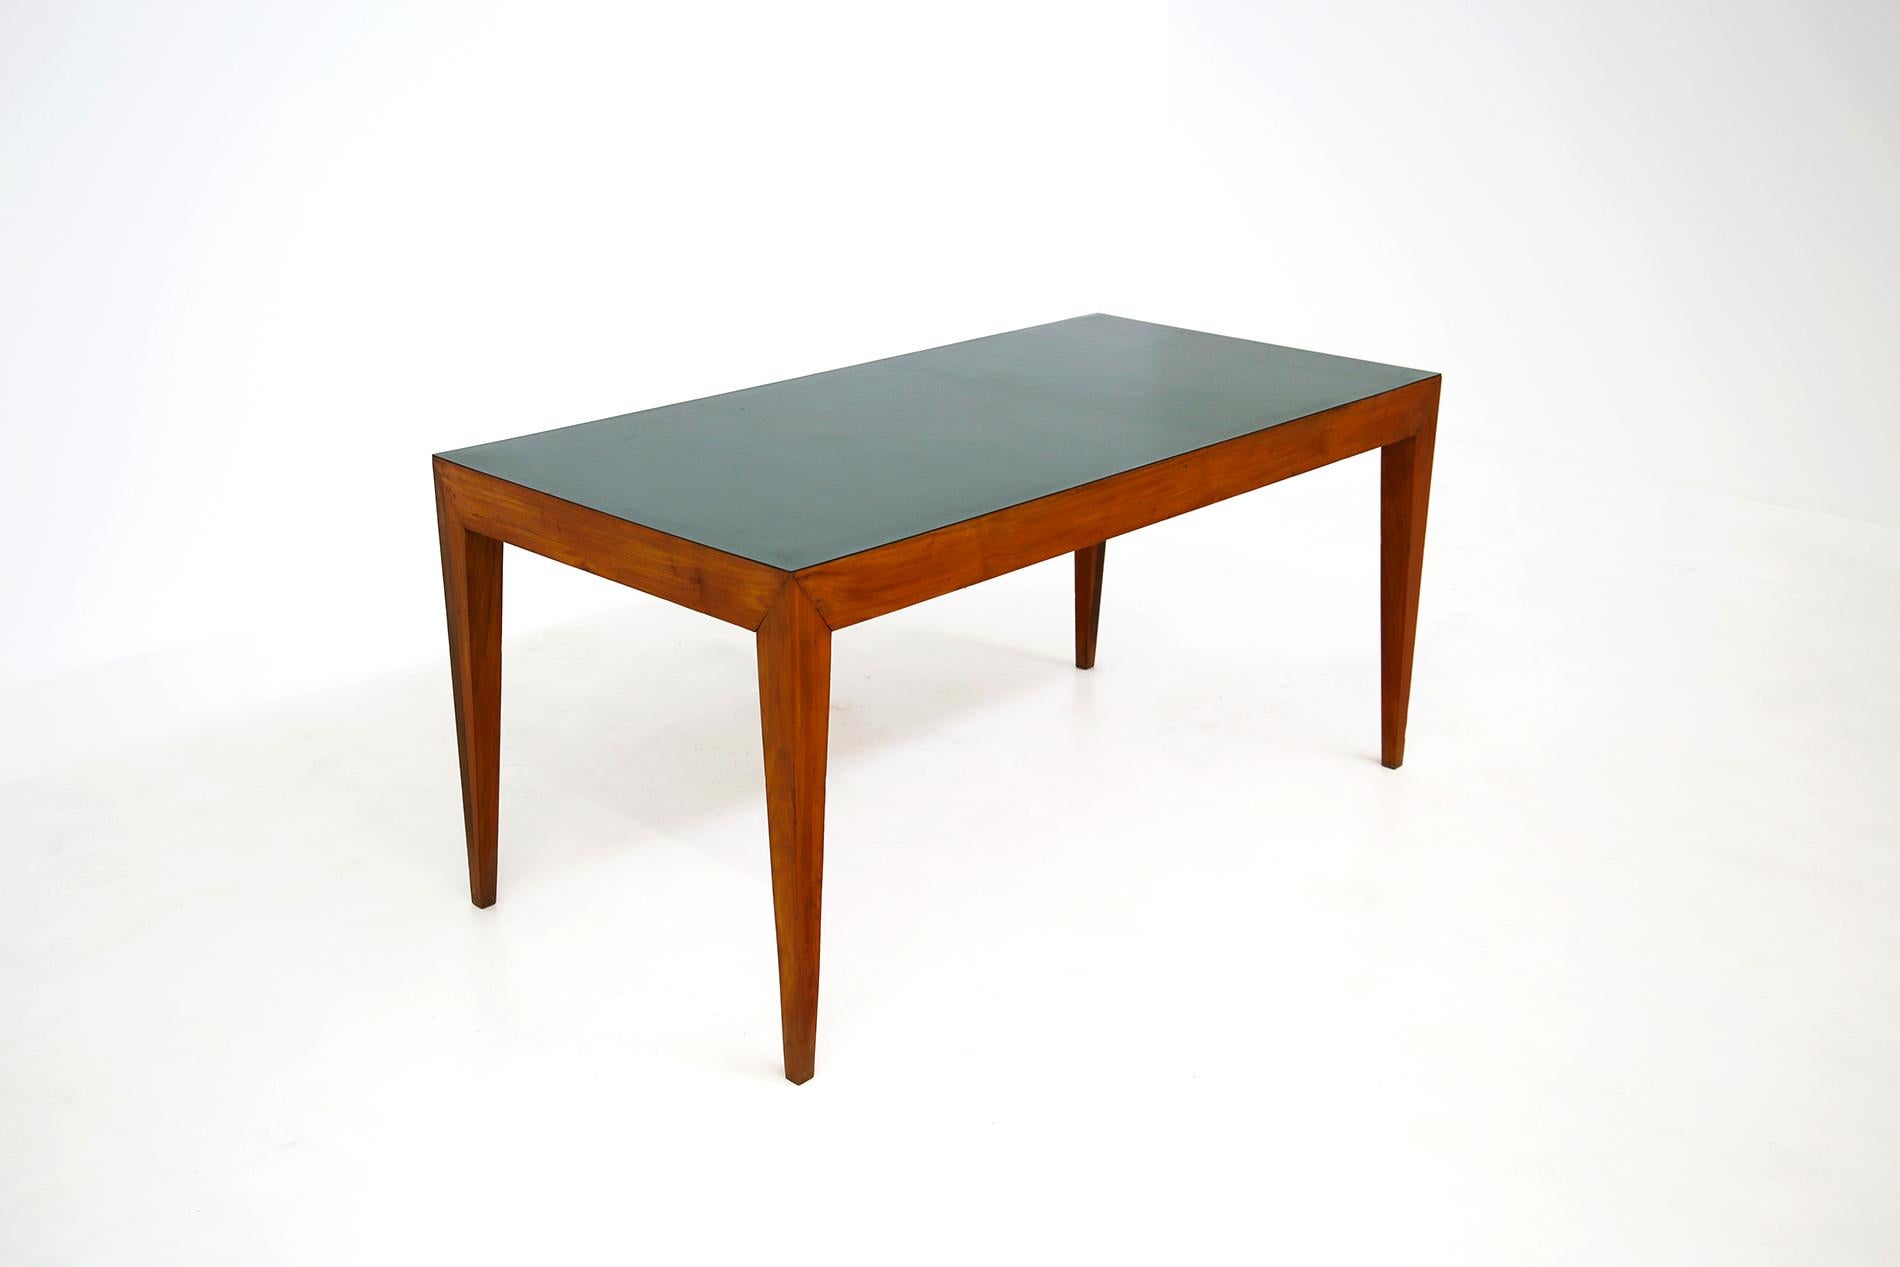 Italian Dining Table Attributed to Gio Ponti in Walnut and Green Formica, 1950s